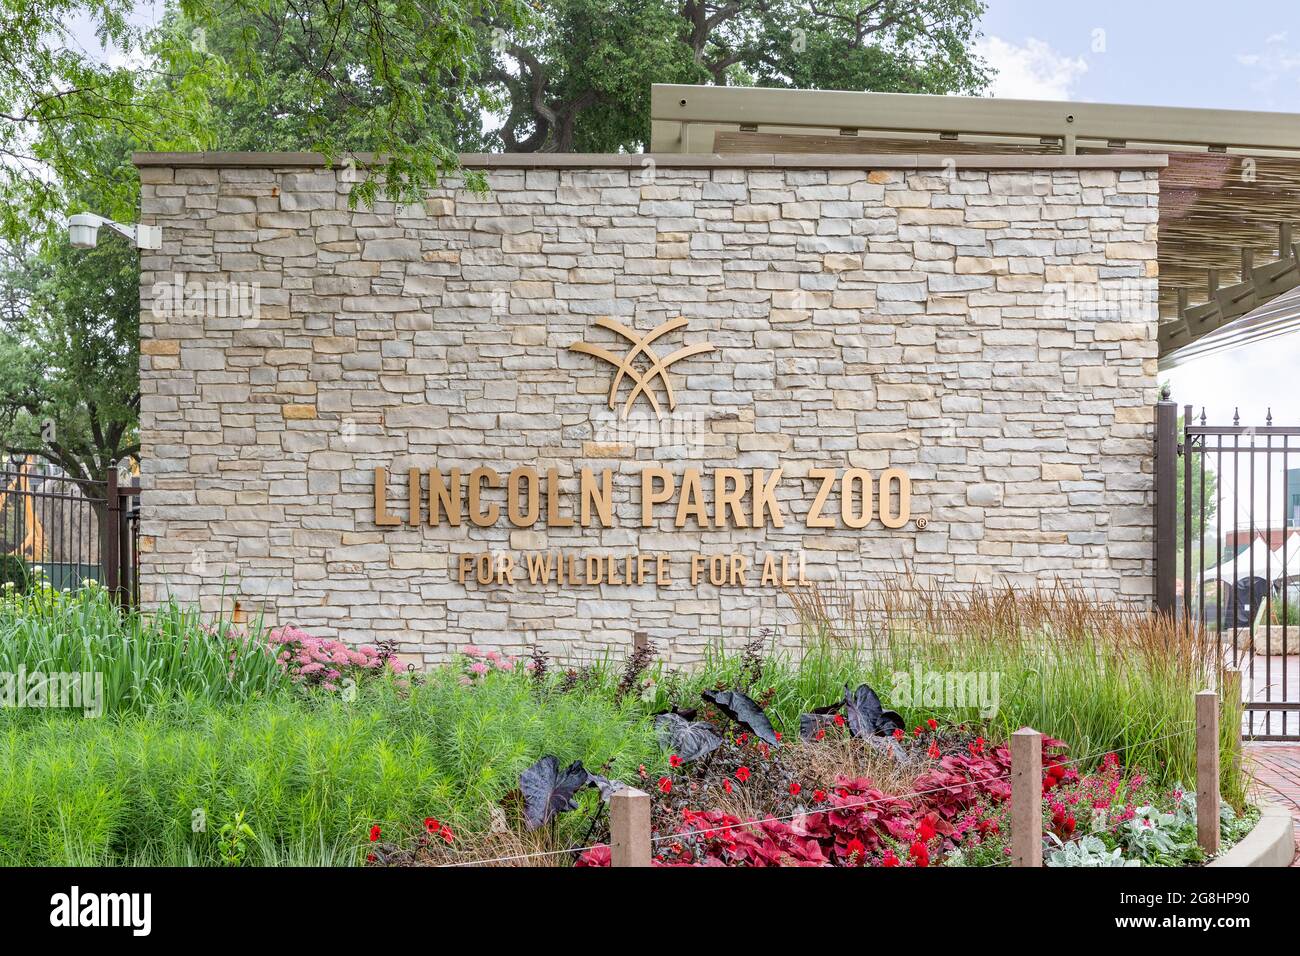 The exterior of Lincoln Park Zoo in the Lincoln Park neighborhood of Chicago. This zoo is free to everyone year round and features 1,100 animals. Stock Photo